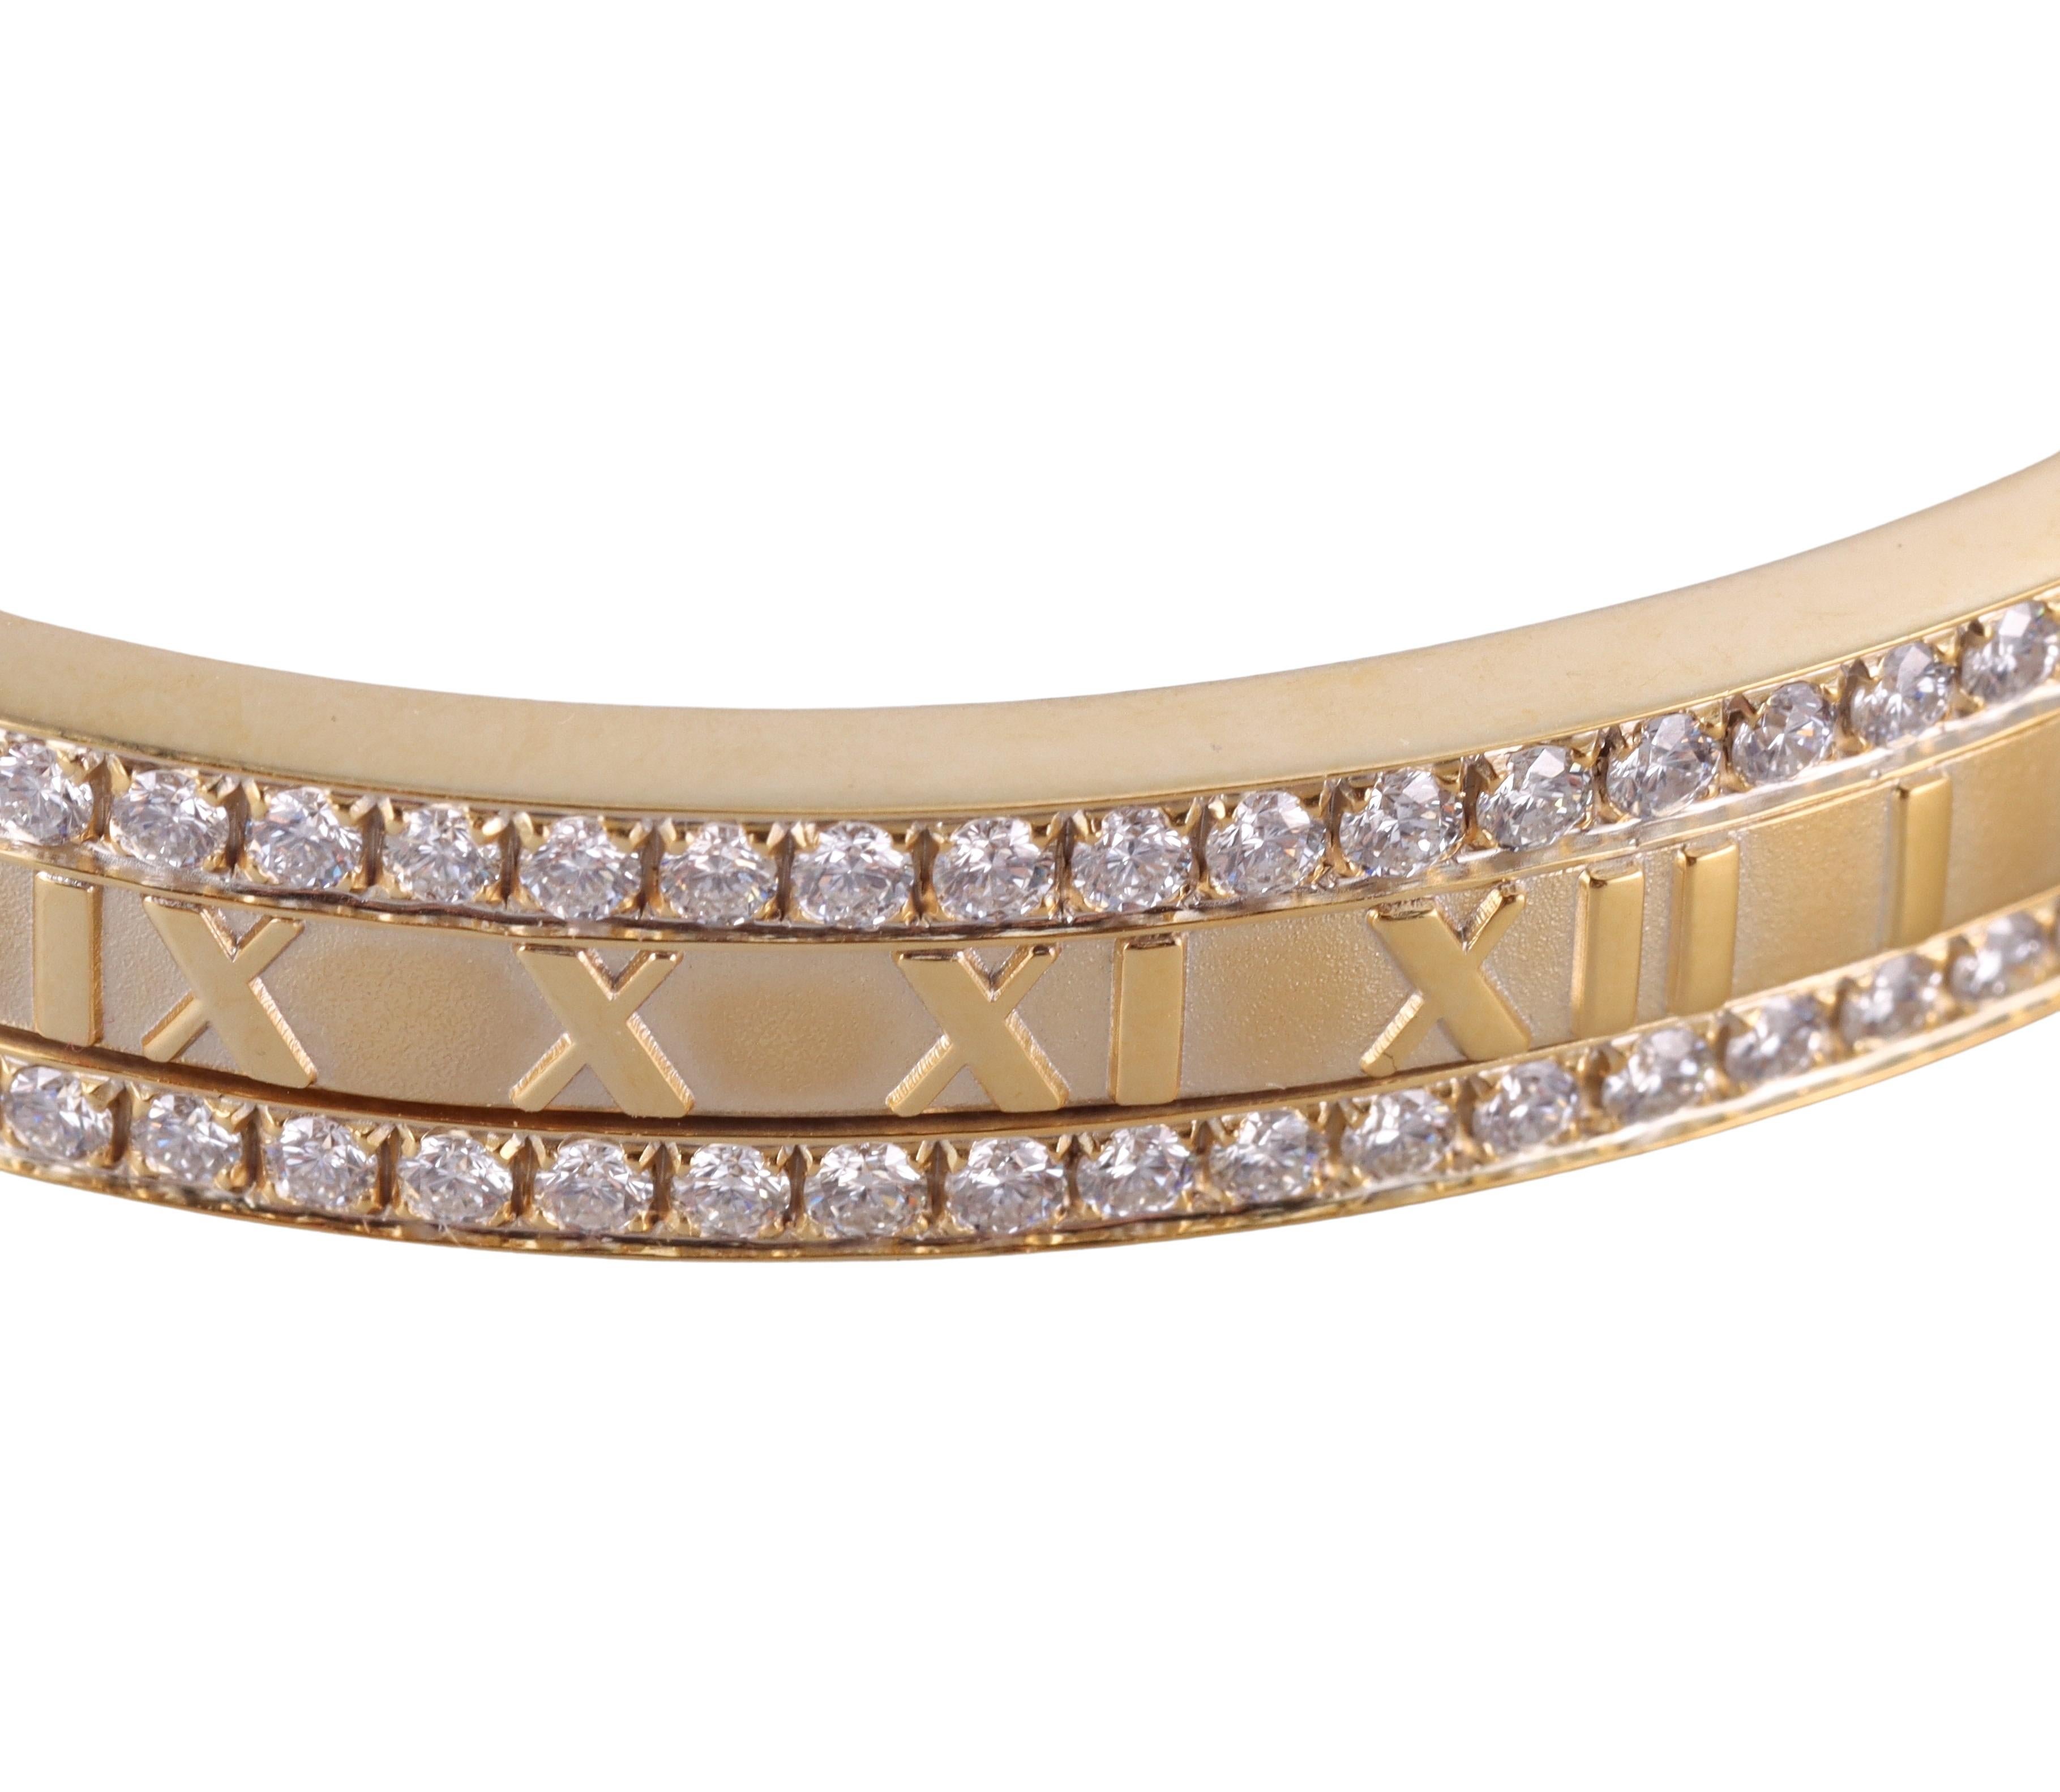 18k yellow gold Atlas bangle bracelet by Tiffany & Co, set with approx. 3.50ctw G/VS diamonds on one side of the bracelet. Will fit an approximately 7